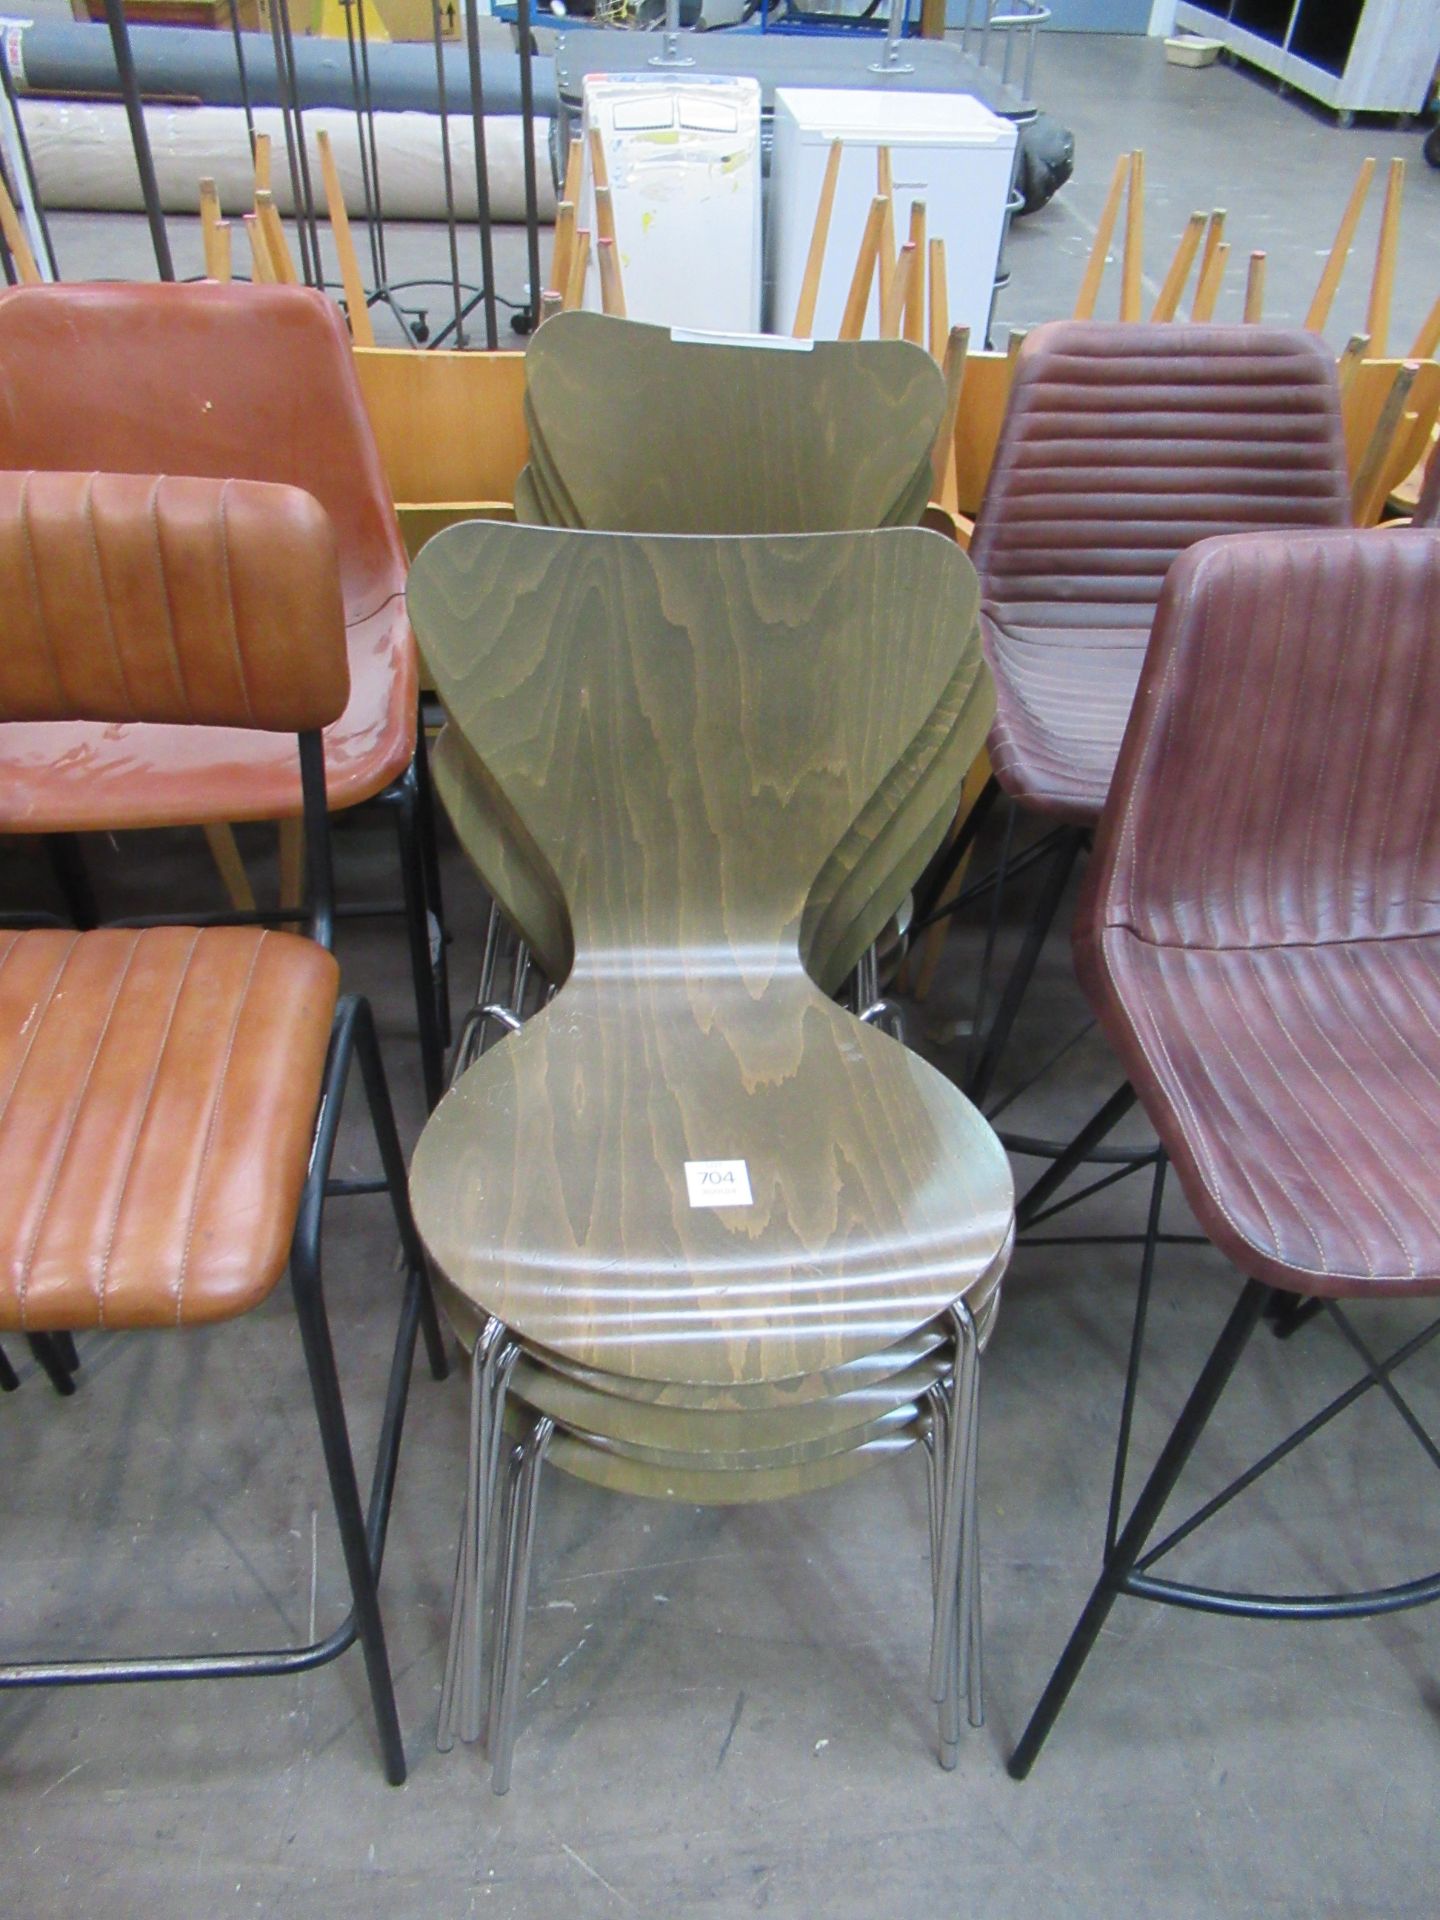 10x Matching Wood/Chrome Stacking Chairs